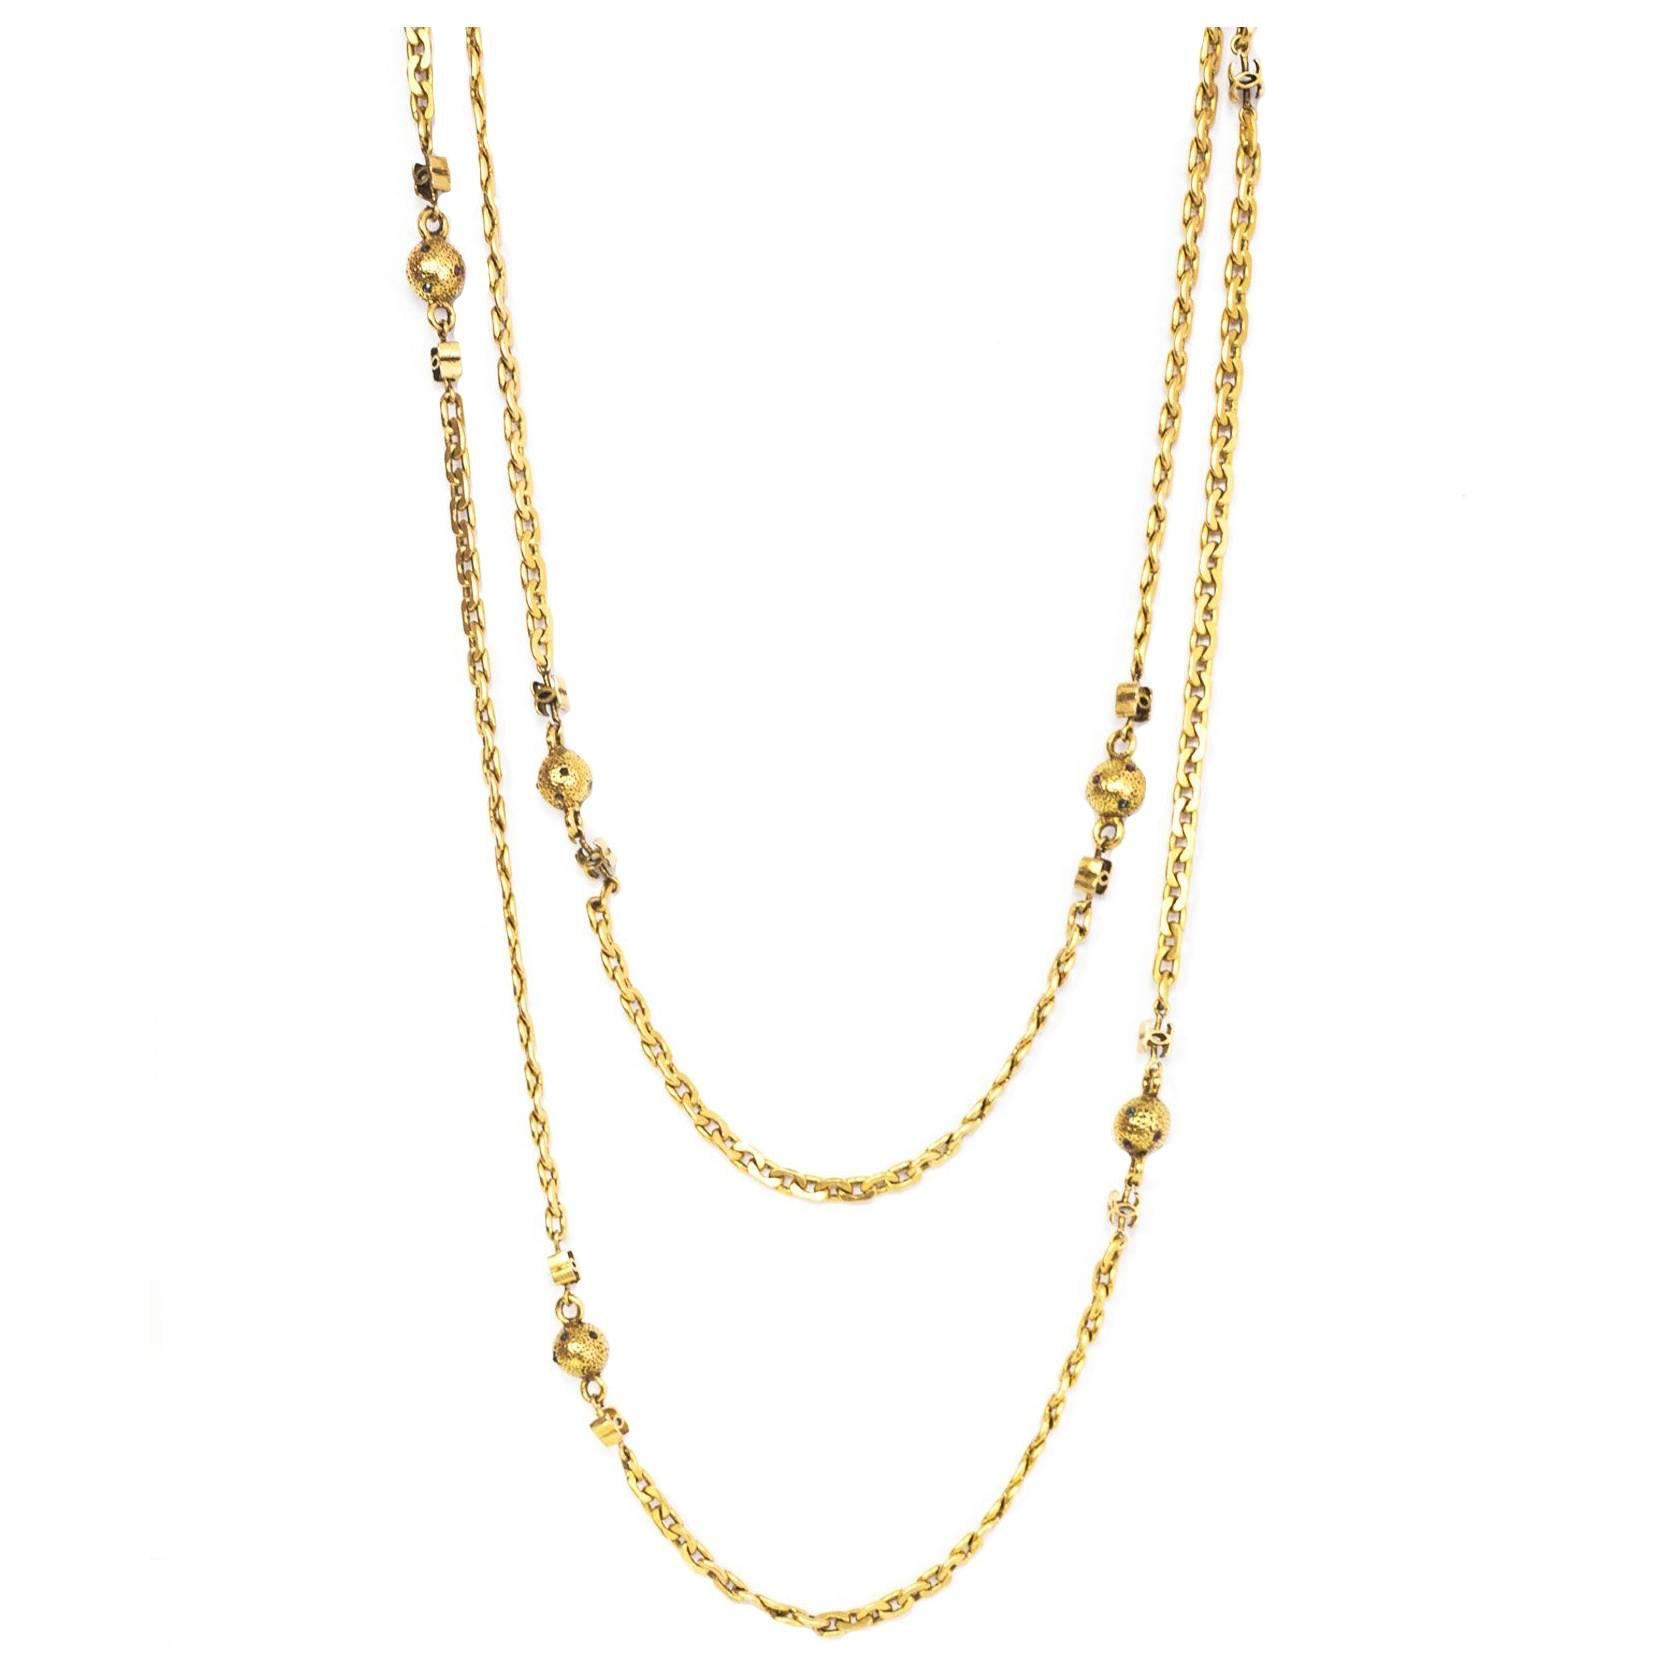 Chanel Vintage Goldtone Necklace with Pave Stones